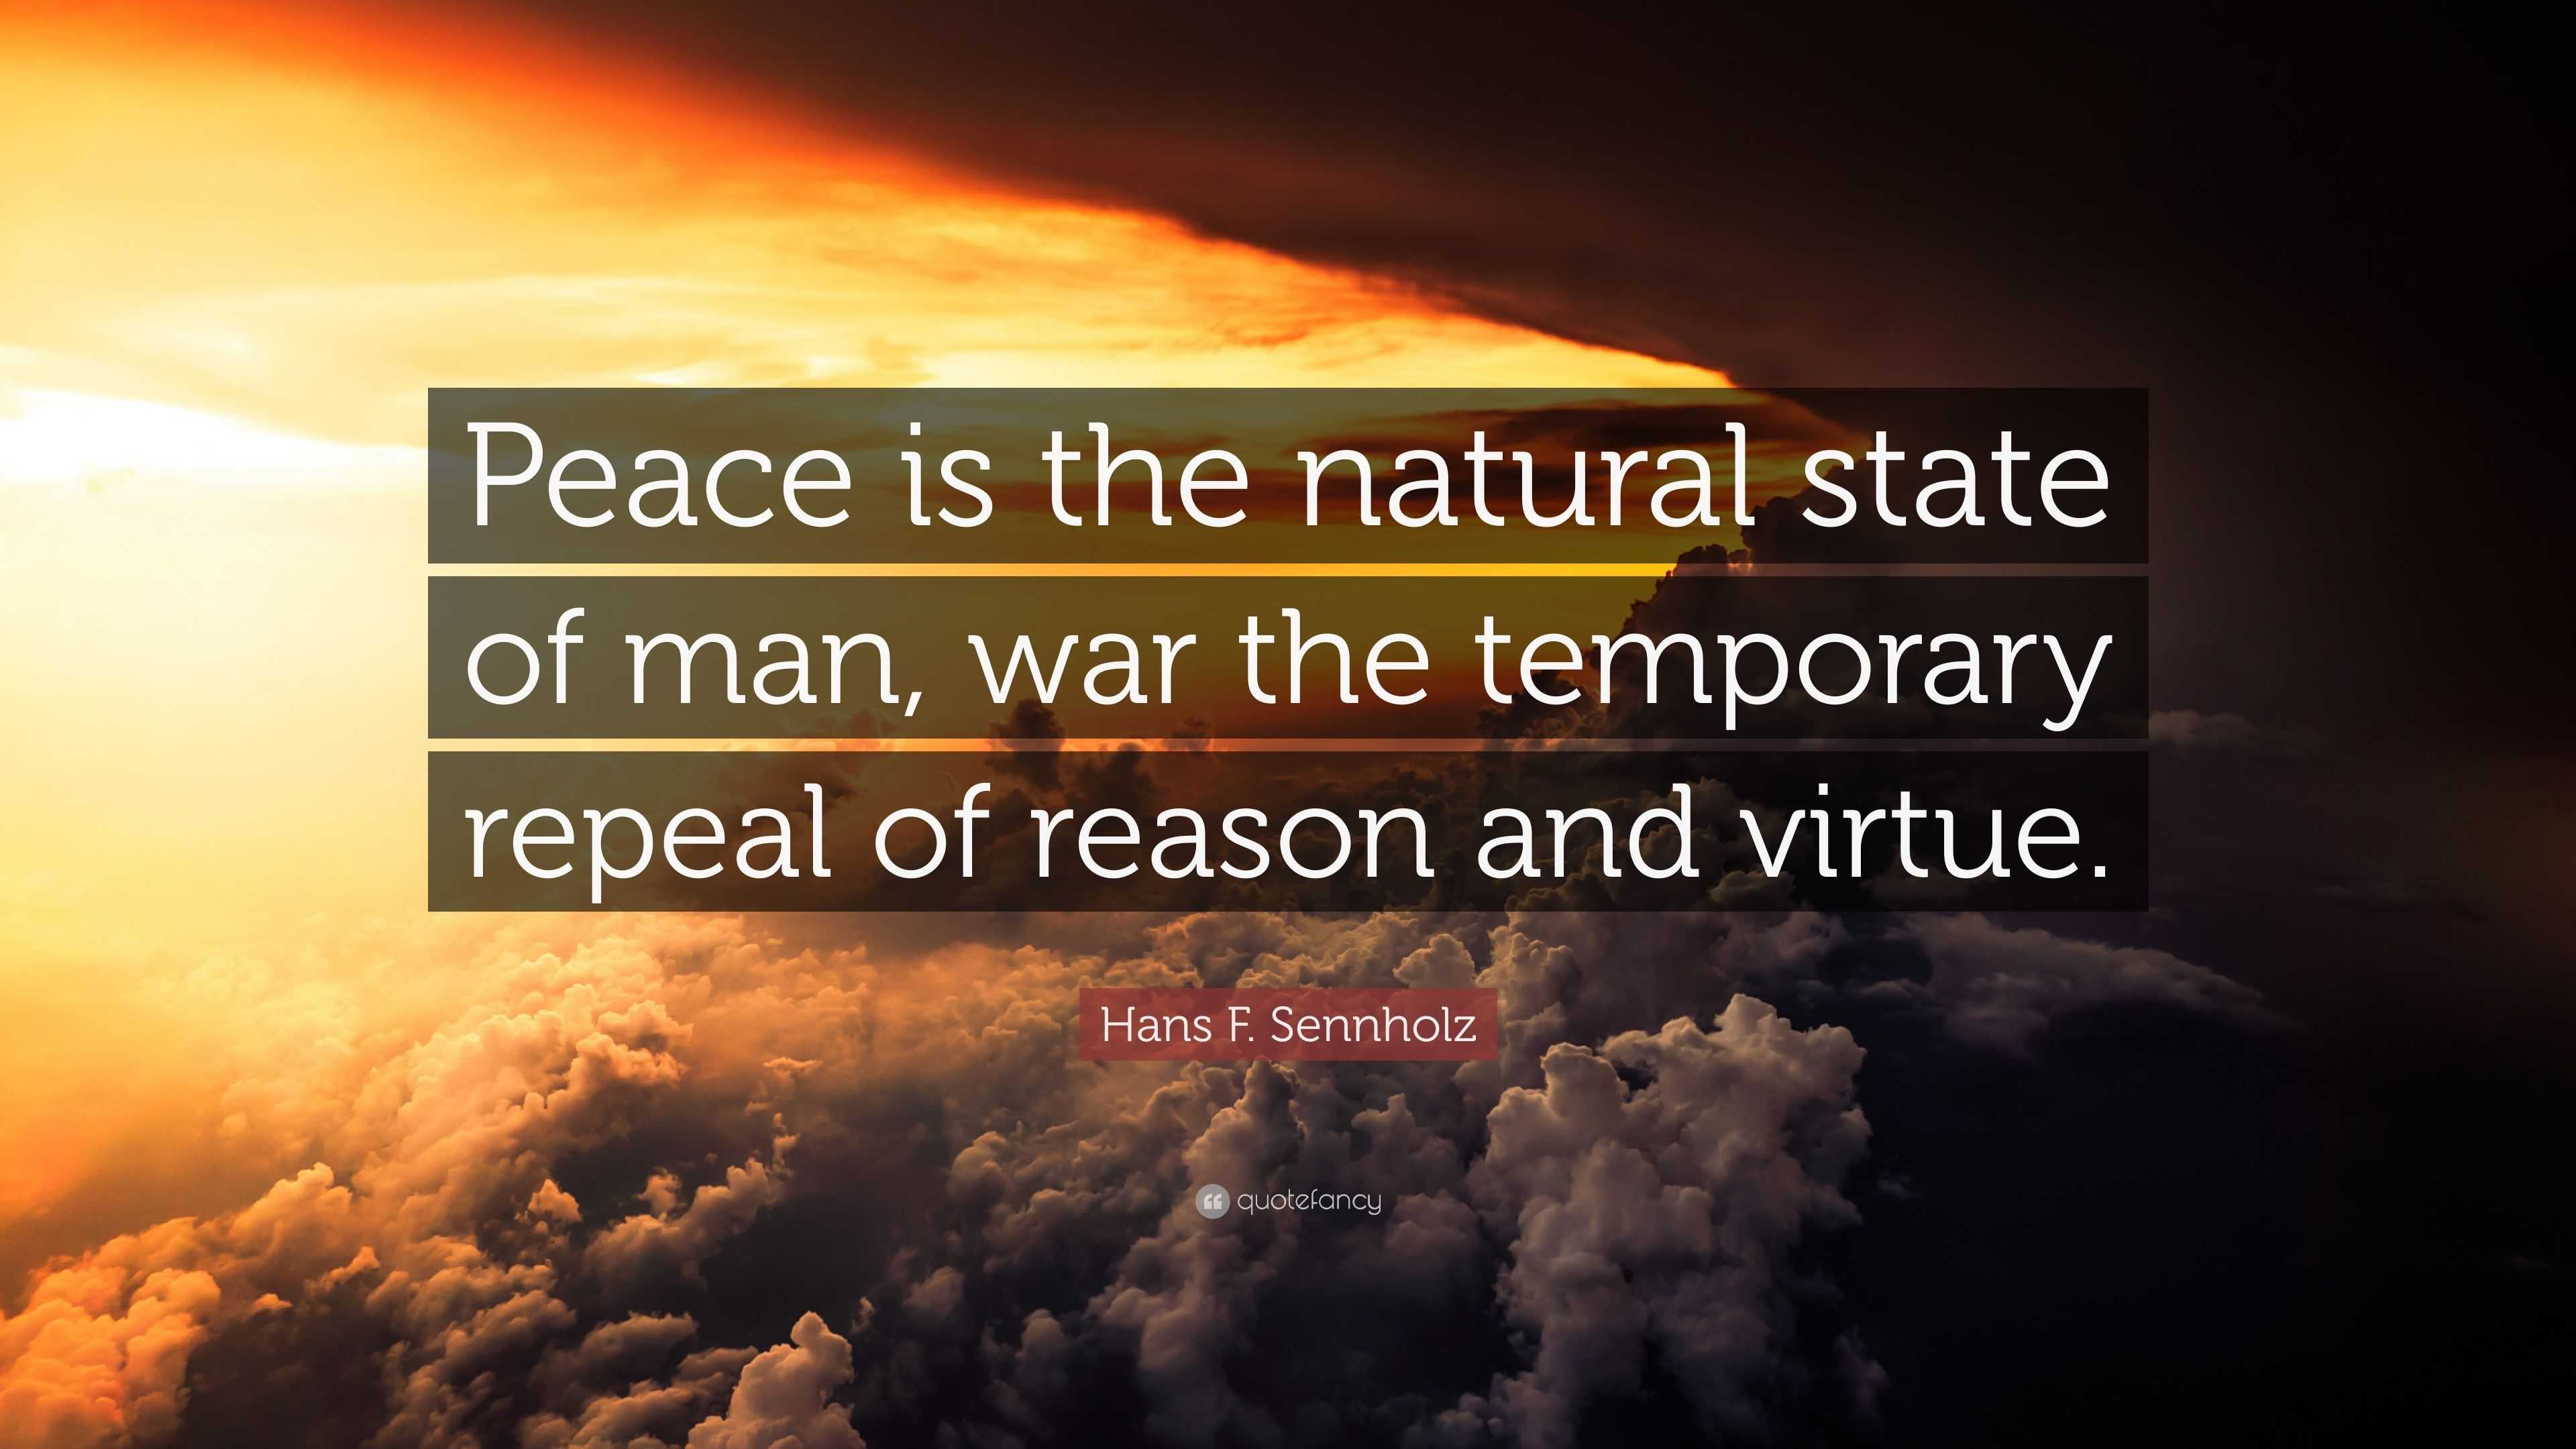 Hans F. Sennholz Quote: “Peace is the natural state of man, war the ...